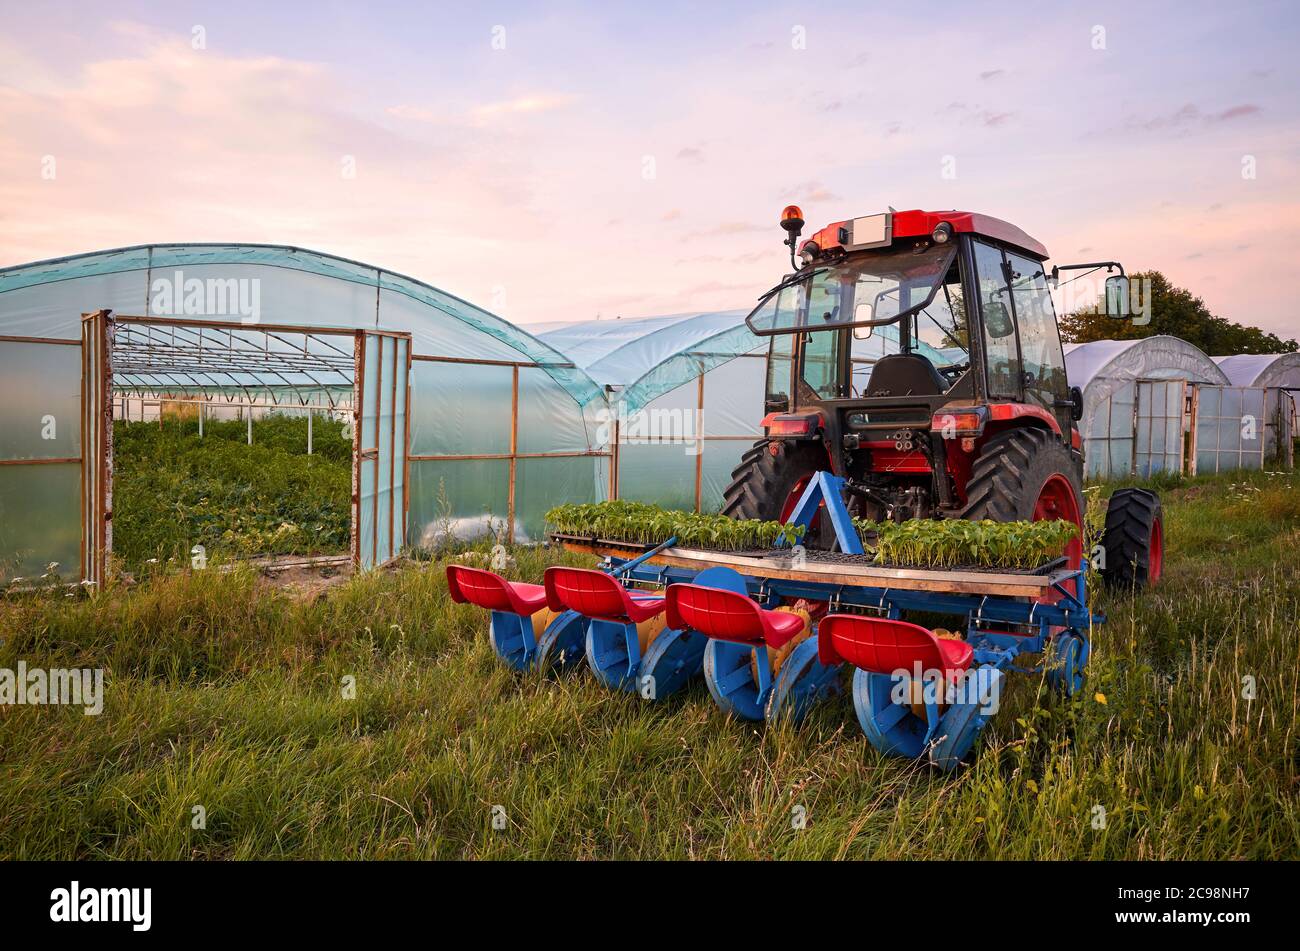 Manual seedling planter mounted to a tractor in front of greenhouses at sunset. Stock Photo